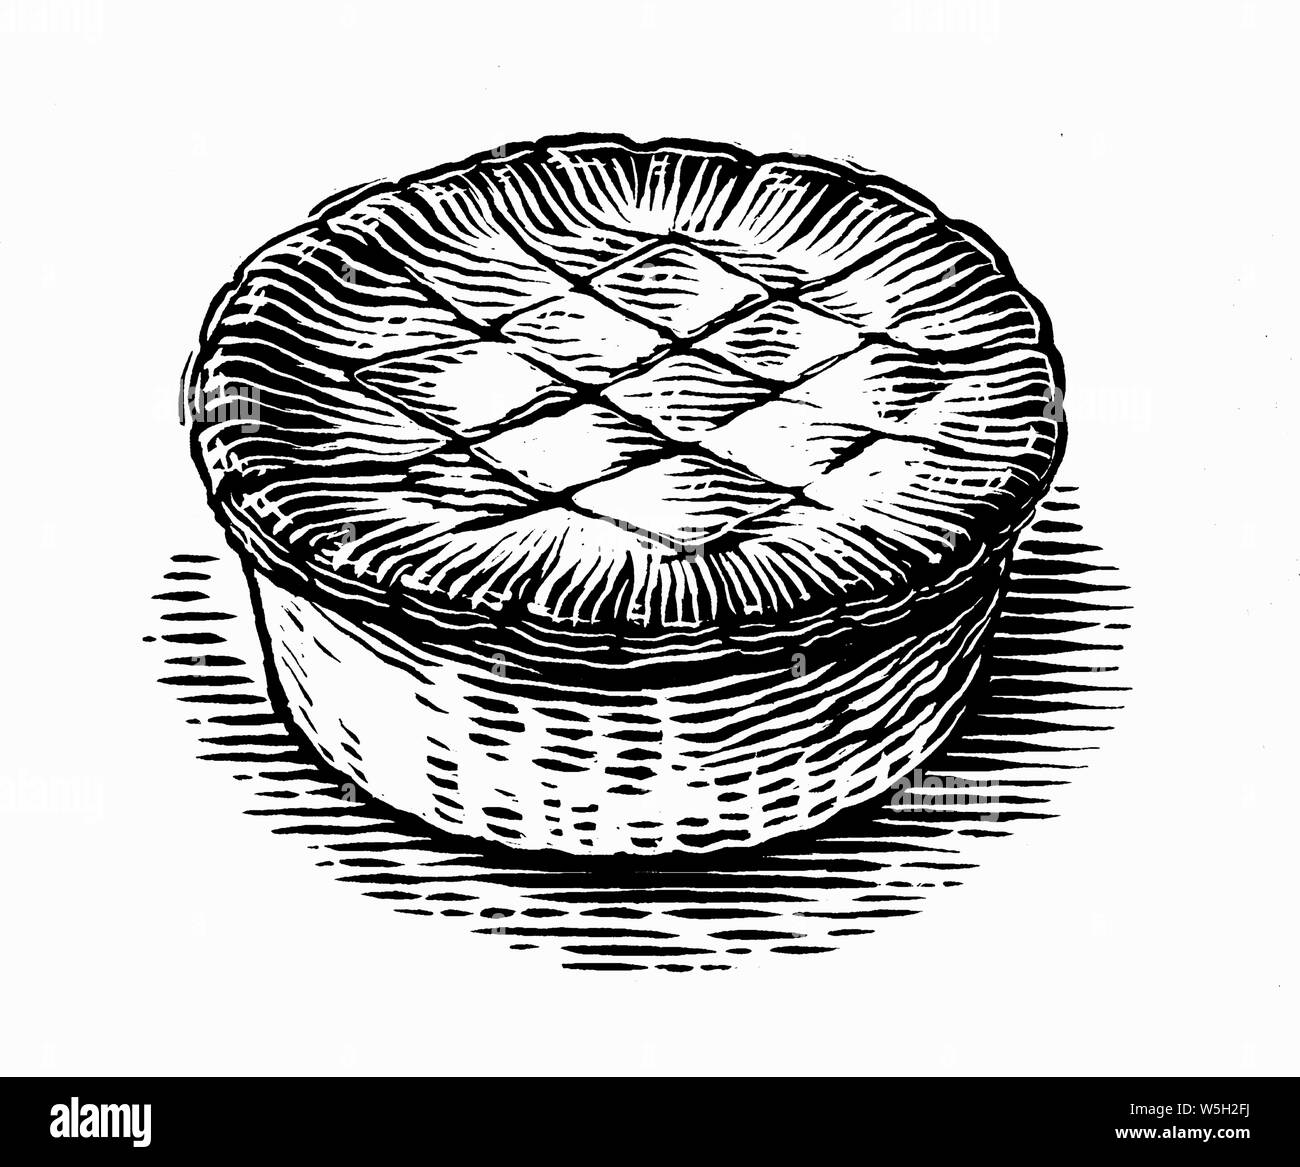 Black and white scraperboard engraving of pastry pie Stock Photo